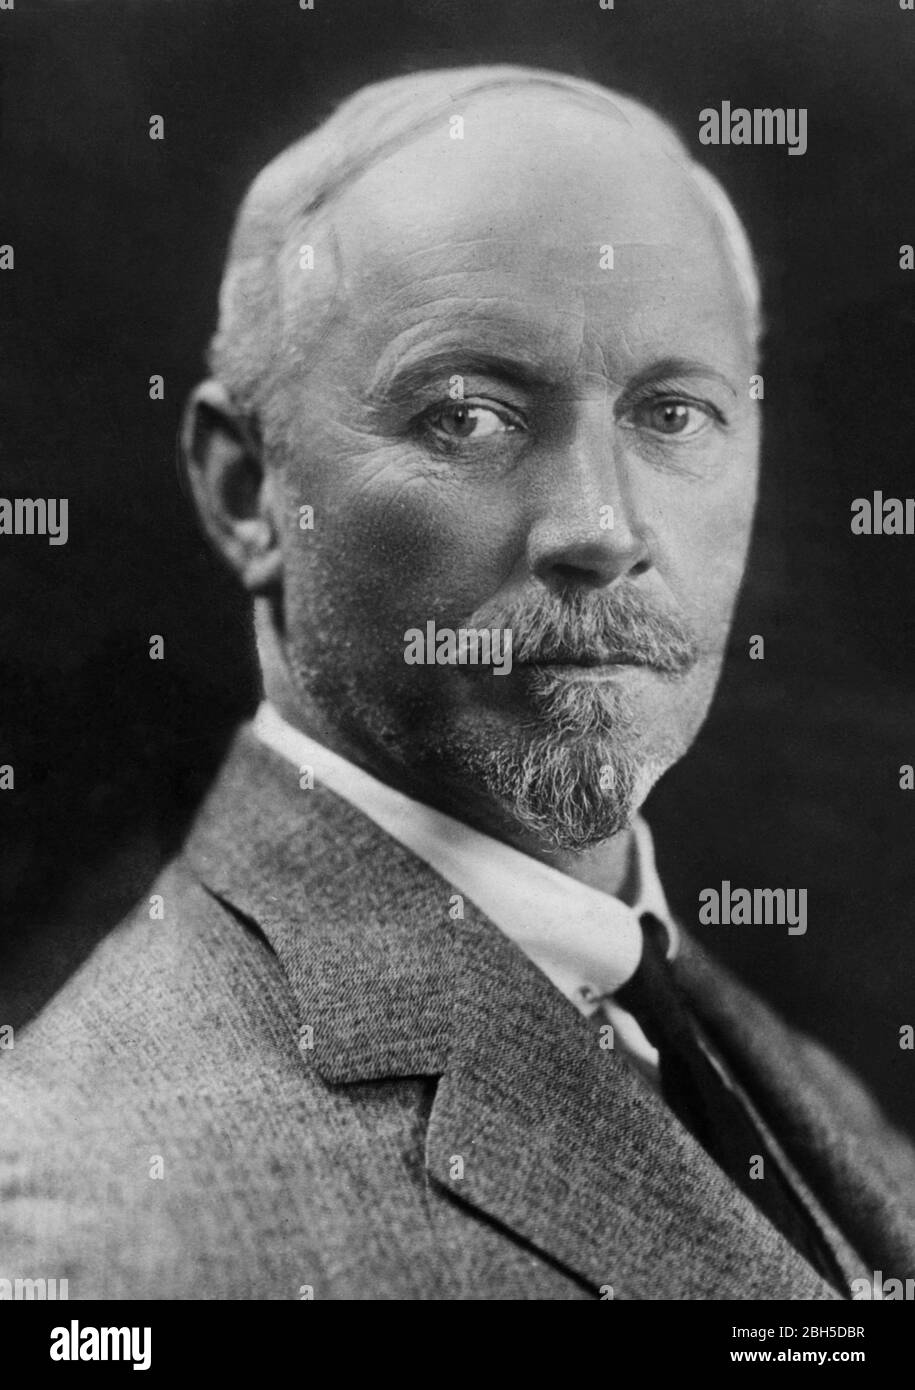 Field Marshal Jan Christian Smuts (1870-1950), c. 1910s. He grew up on a farm, became a brilliant student of law, philosophy, poetry, etc.  He got into politics, then the military, then lobbied for South African interests in London. He became prime minister of the Union of South Africa right after World War I and then again during World War II.  But for much of his life, he was hated by many Afrikaners.  To see my other vintage images, Search:  Prestor  vintage WW I Stock Photo